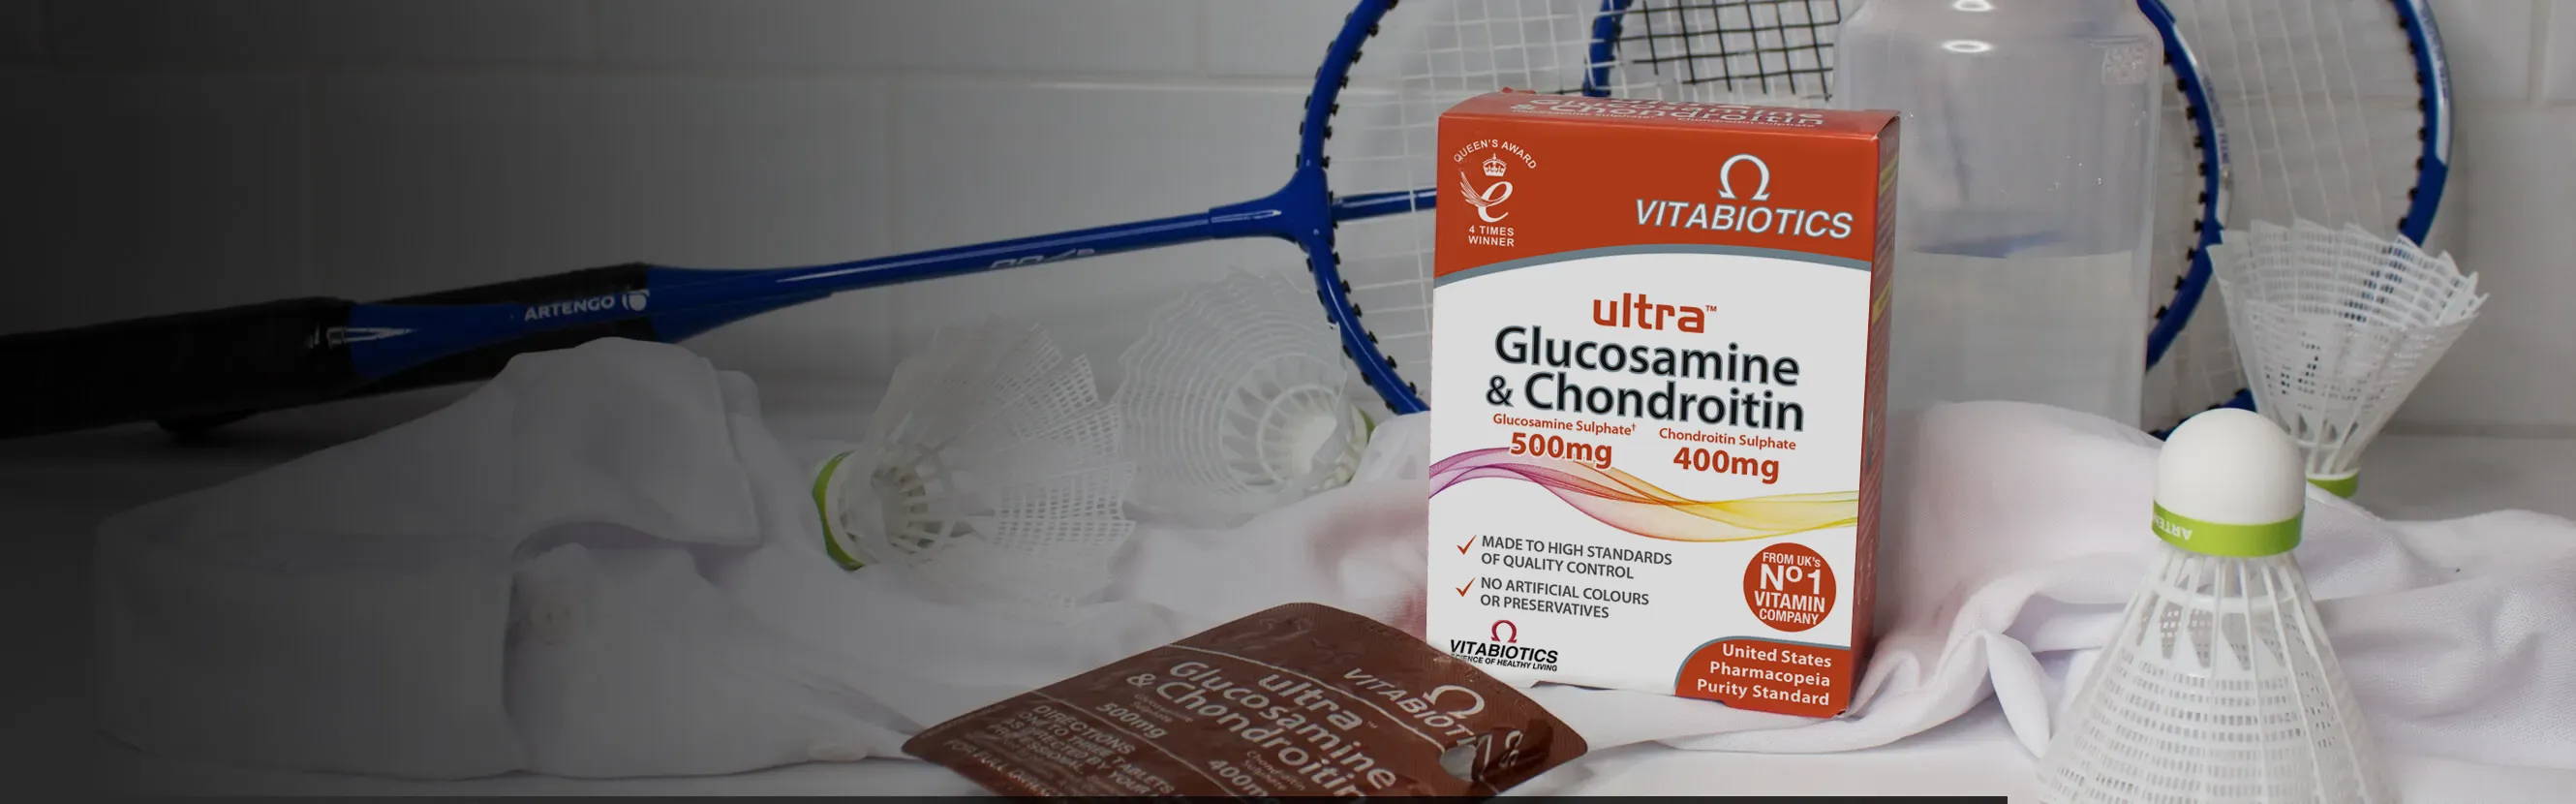  When it comes to glucosamine and chondroitin, the details of formulation make all the difference. That’s why Ultra Glucosamine & Chondroitin is scientifically formulated for quality – glucosamine in its preferred potassium form and a premium low molecular weight form of chondroitin. 